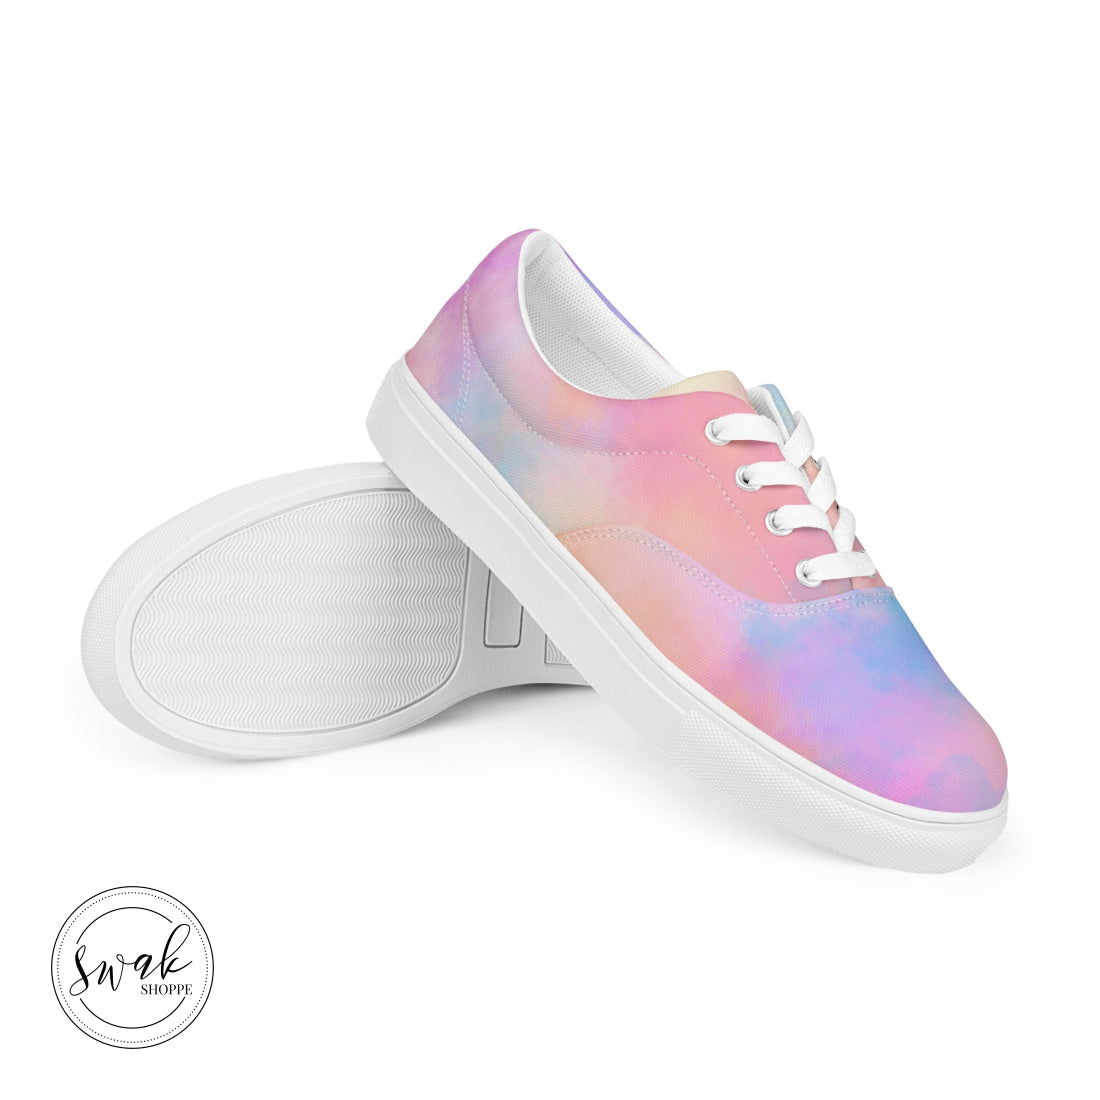 Lover Rainbow Cloud Womens Lace-Up Canvas Shoes